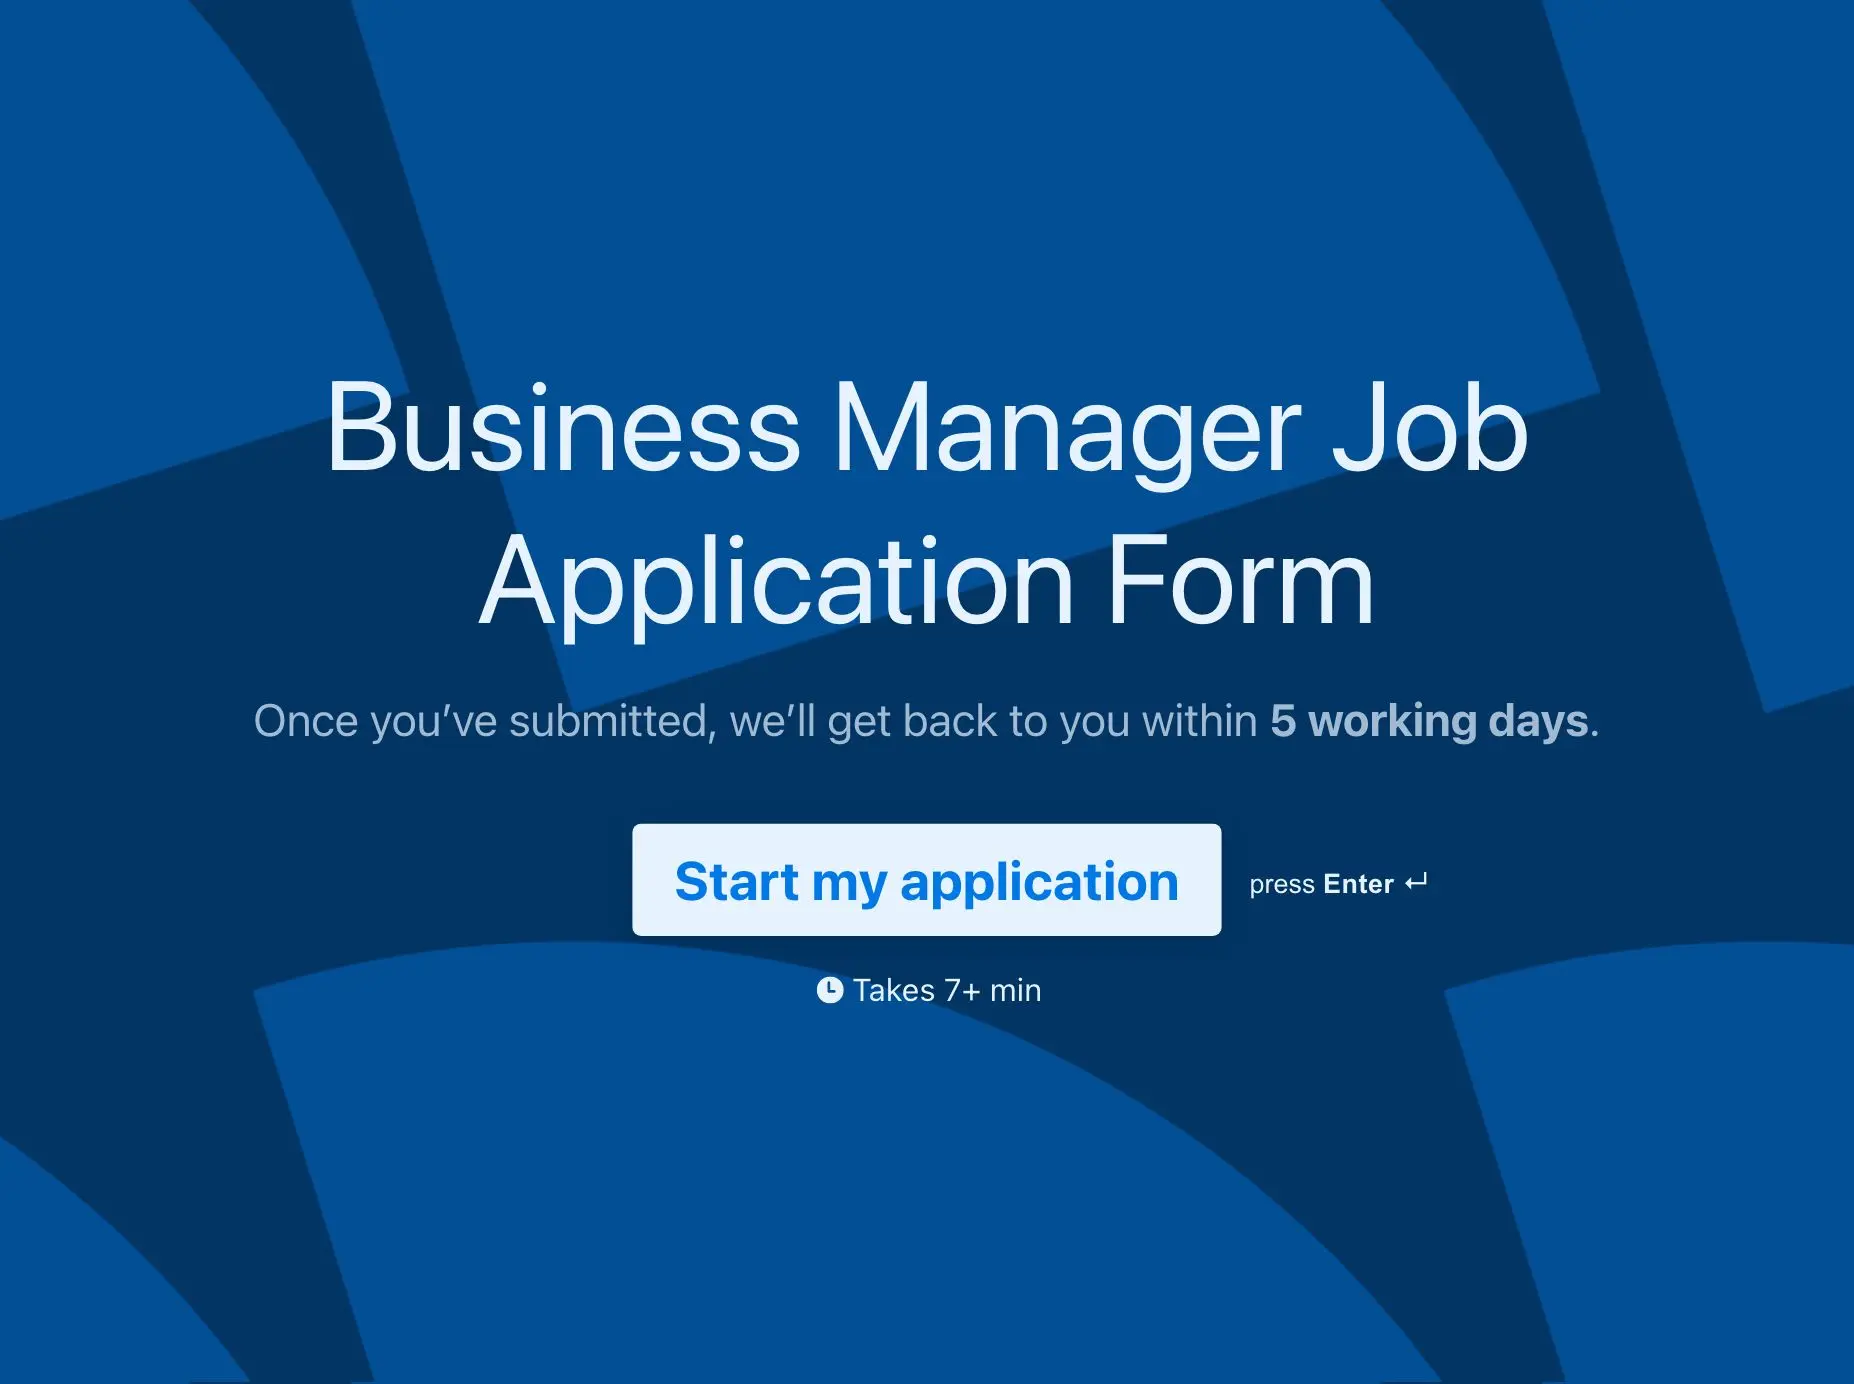 Business Manager Job Application Form Template Hero